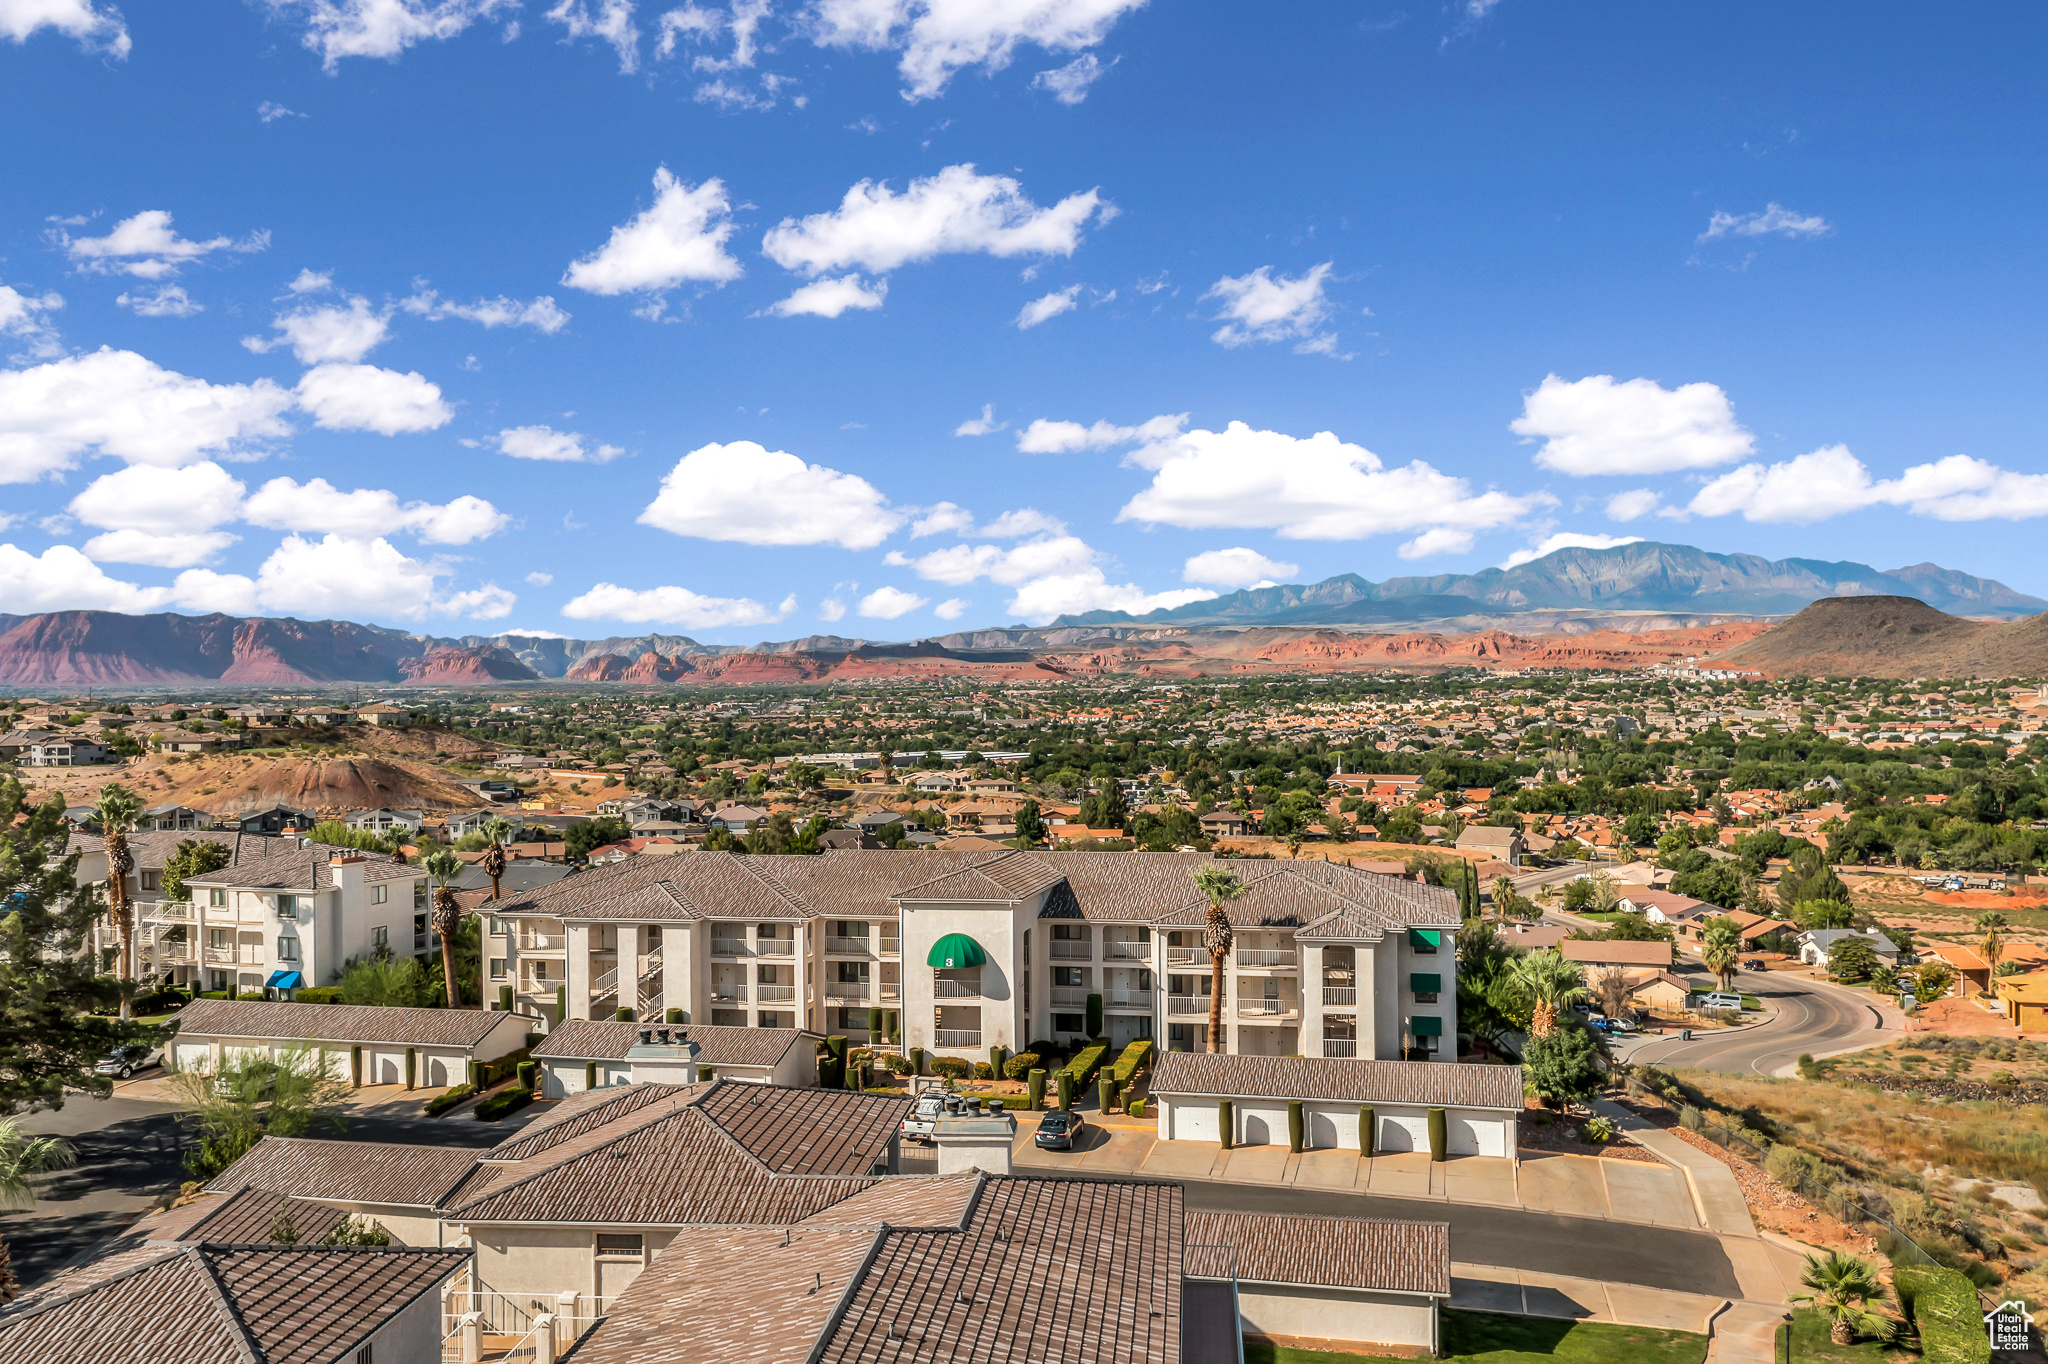 1845 W CANYON VIEW, St. George, Utah 84770, 2 Bedrooms Bedrooms, 8 Rooms Rooms,2 BathroomsBathrooms,Residential,For sale,CANYON VIEW,1993907